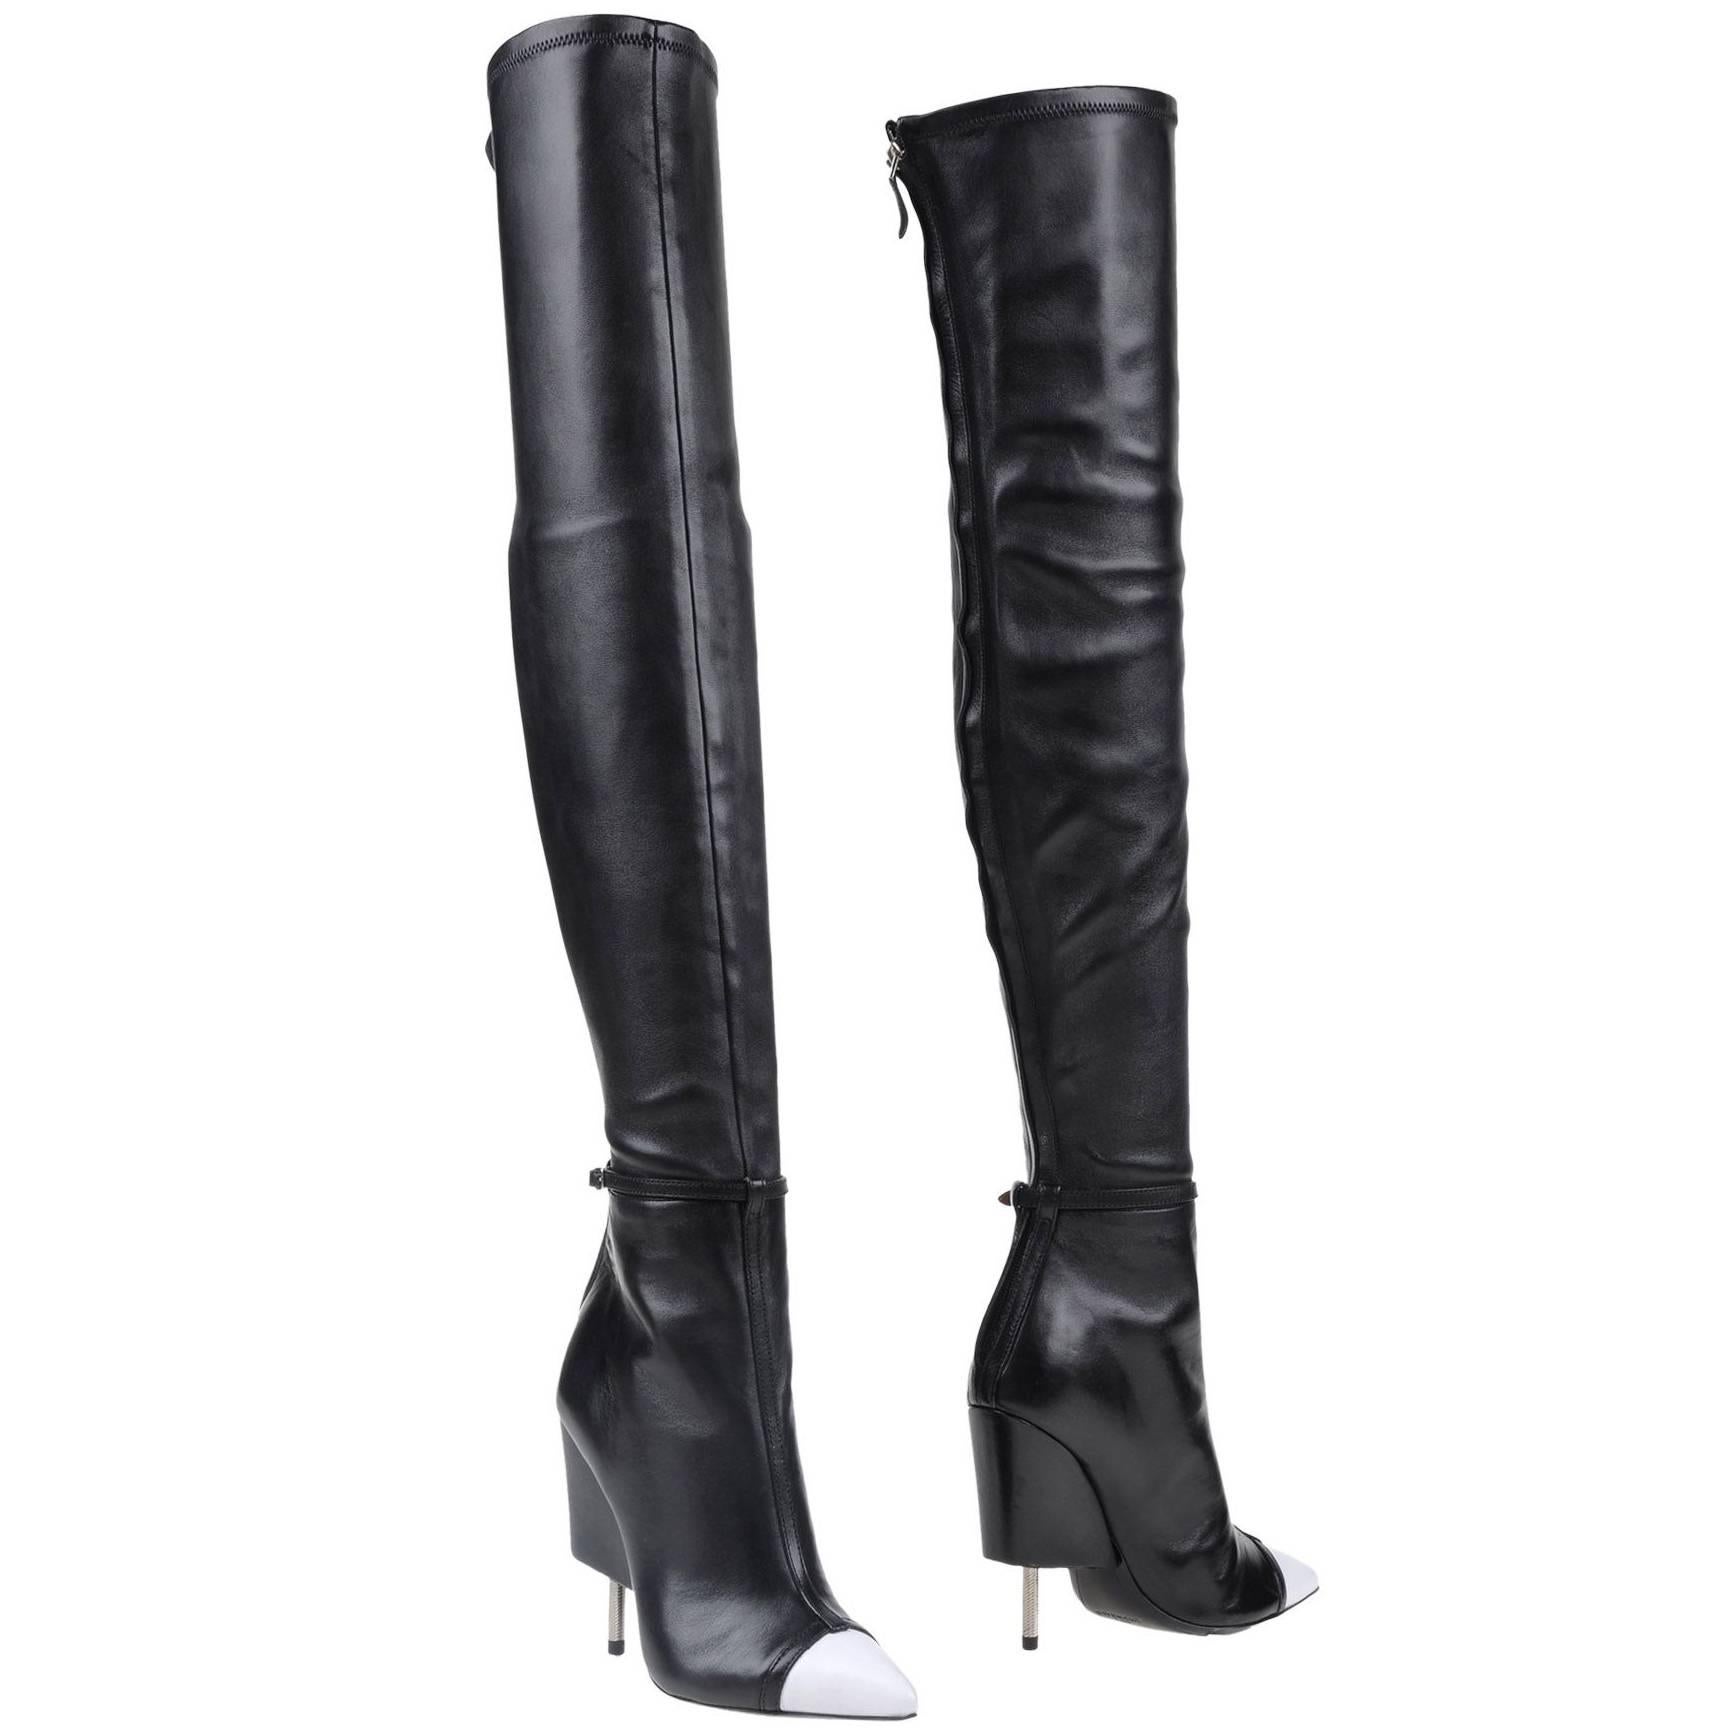 Givenchy NEW & SOLD OUT Black Lambskin Metal Heel Over Knee Shoes Boots in Box